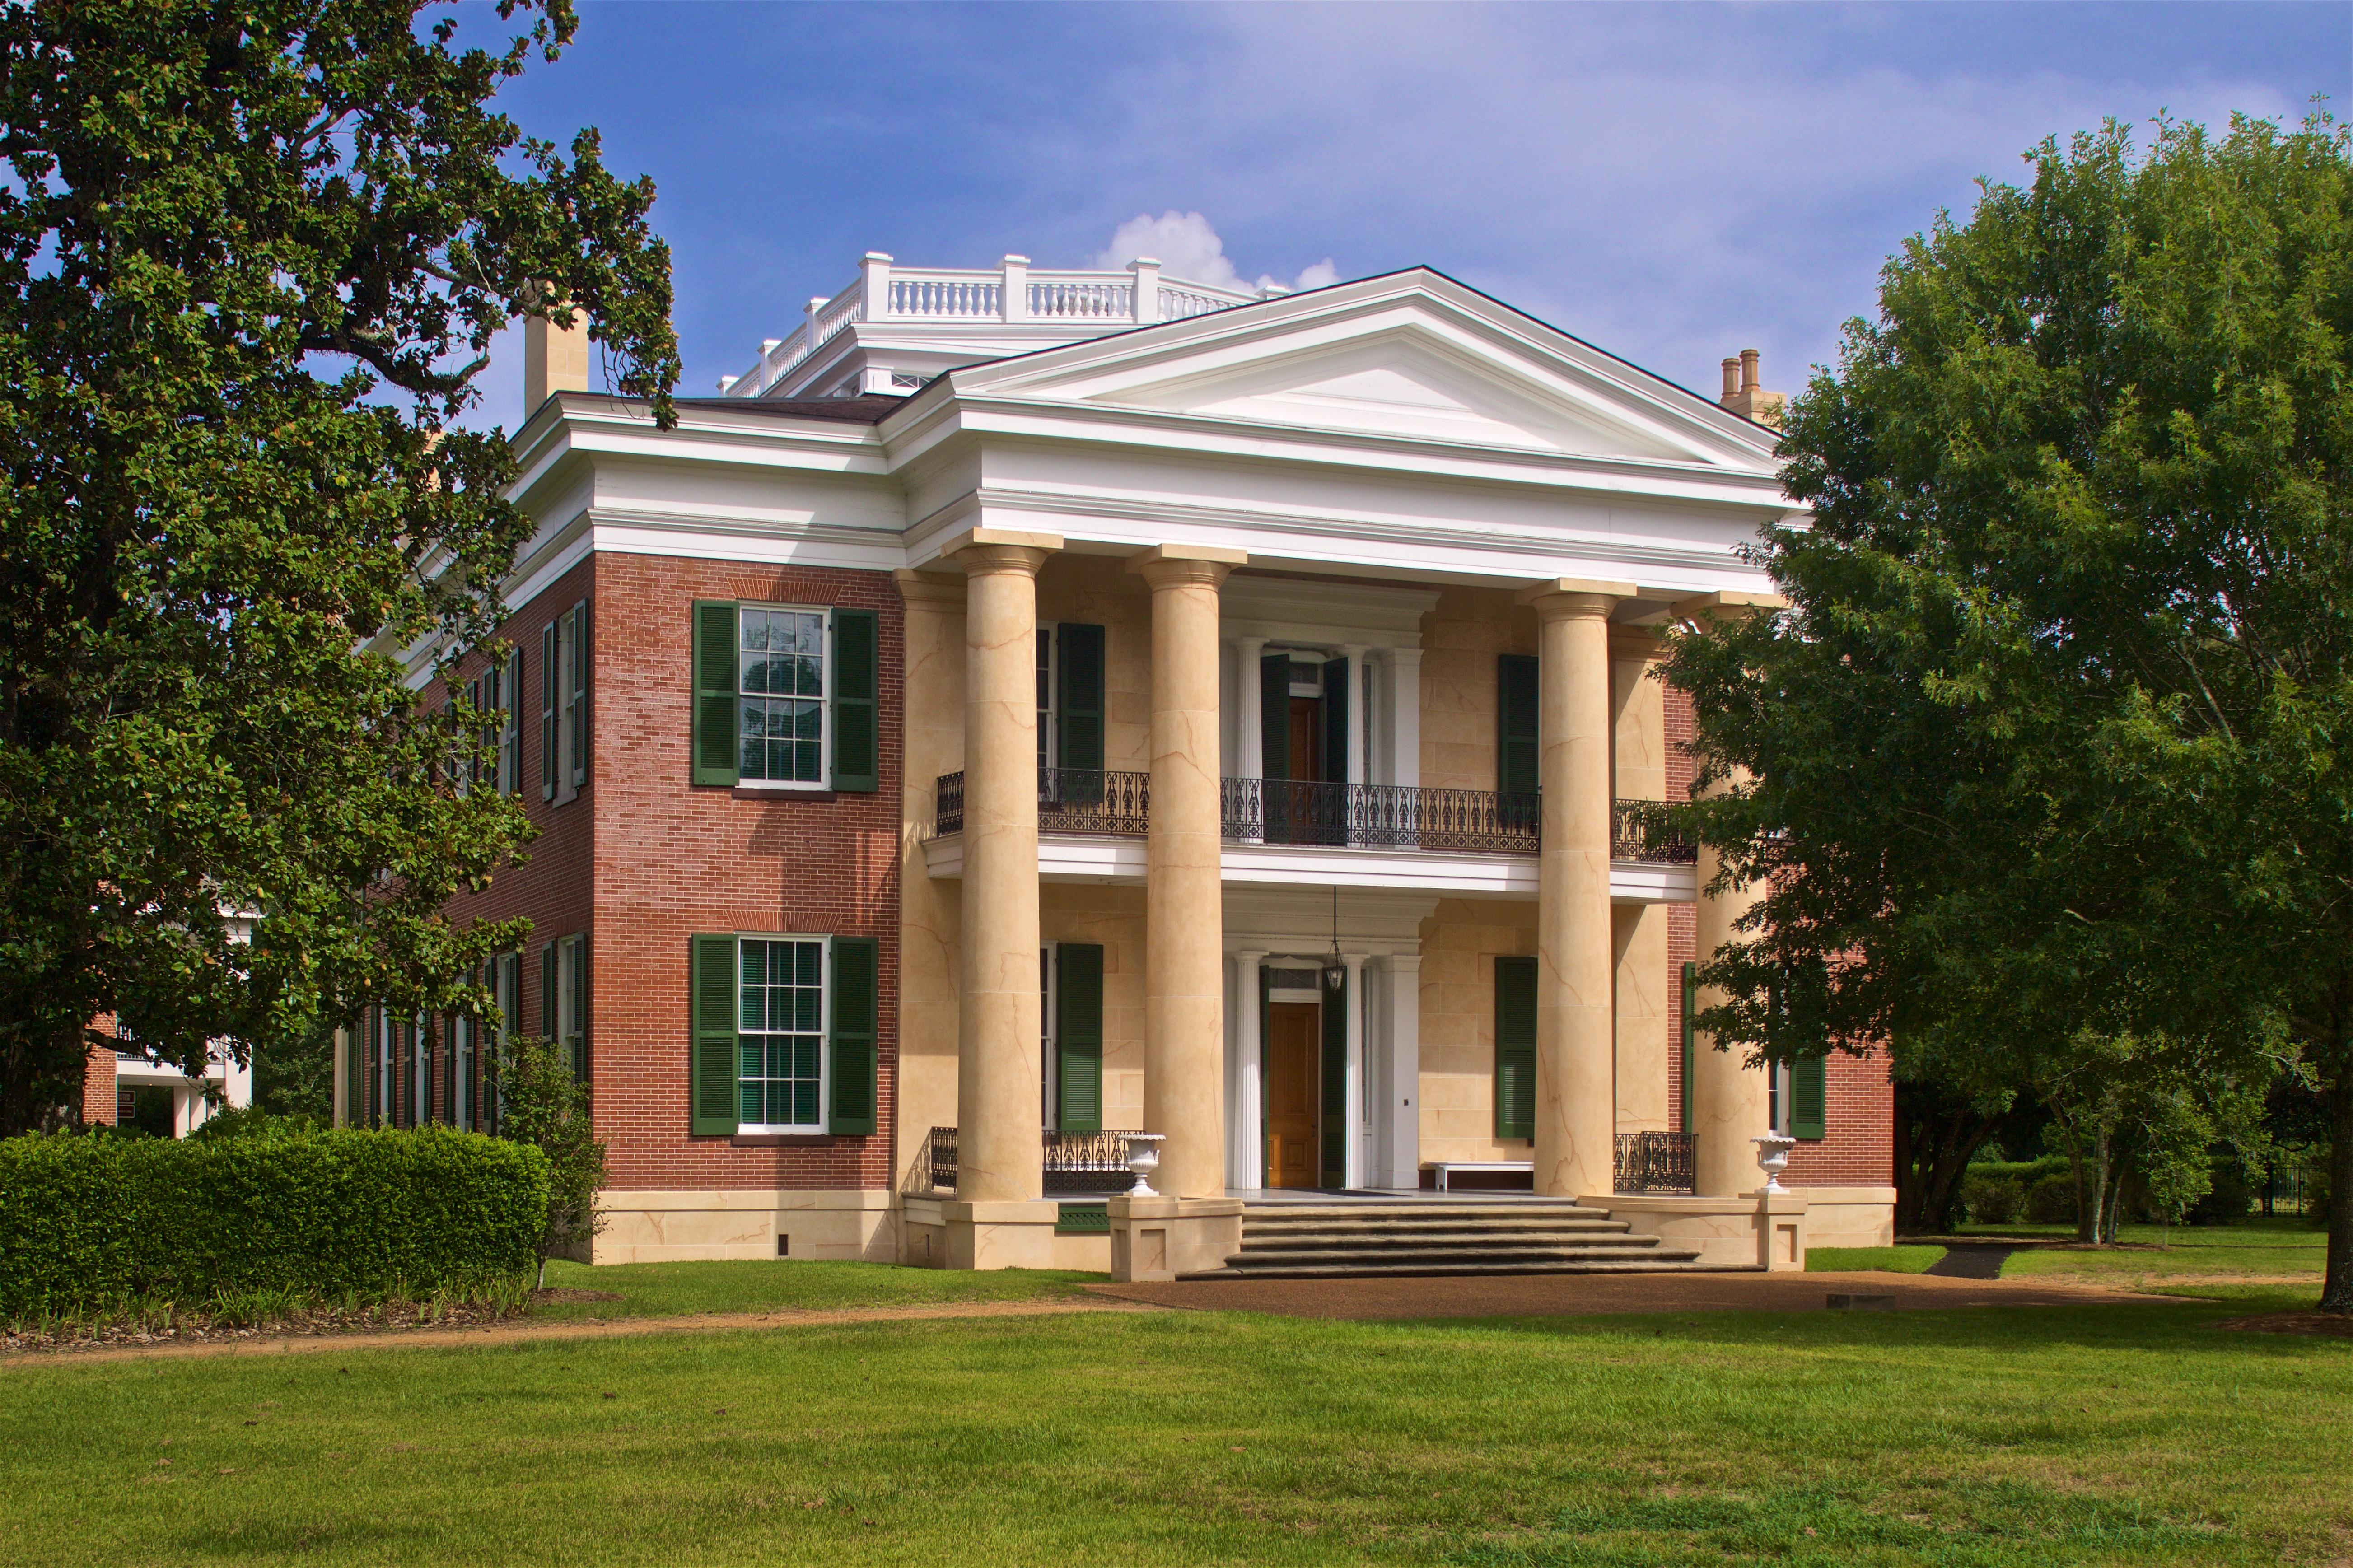 Two story brick mansion with columns